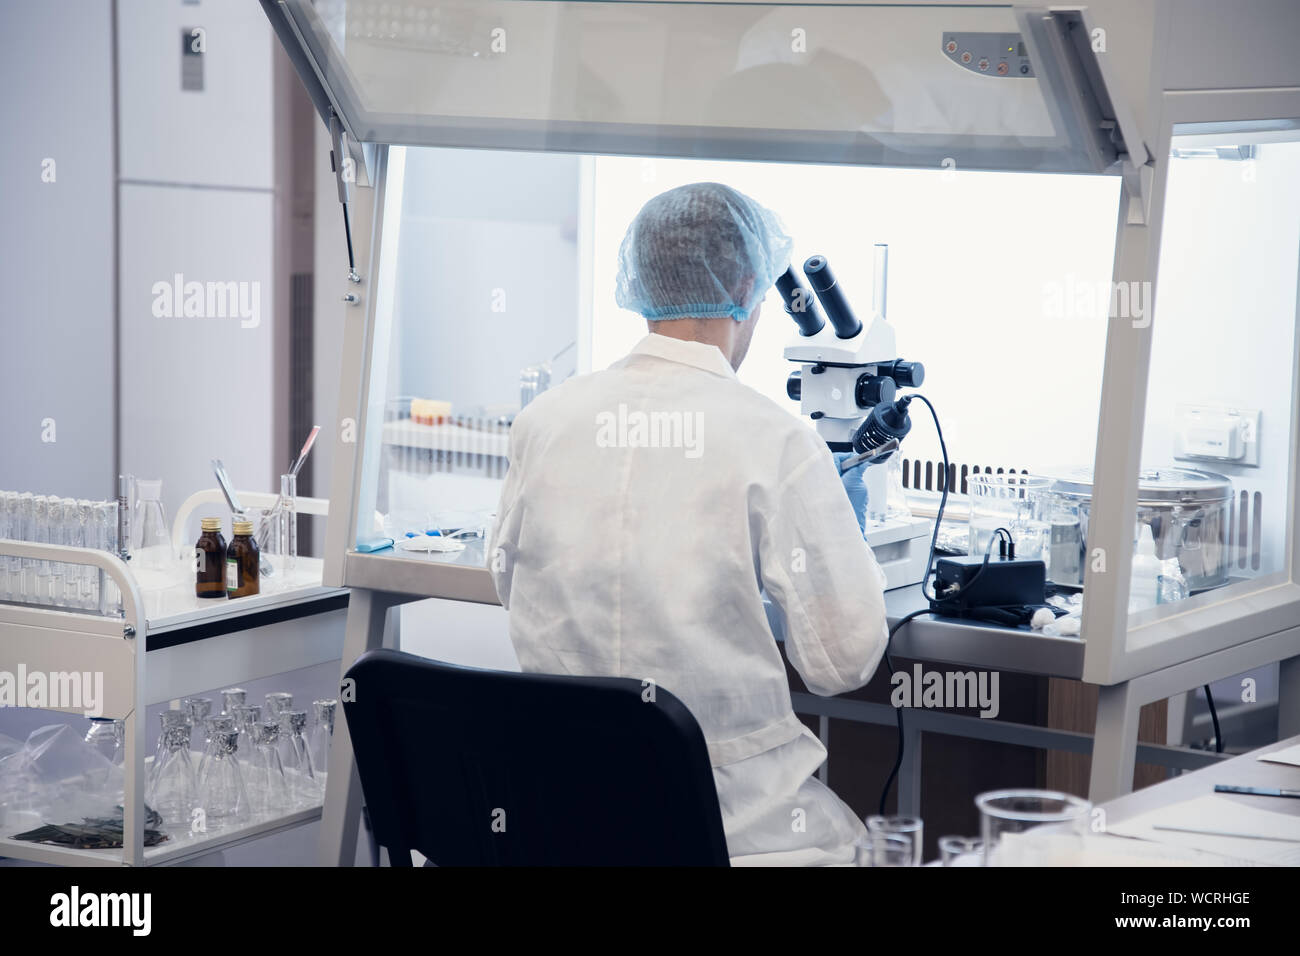 Biotechnology in agriculture. Chemical laboratory. Scientists at work. Stock Photo